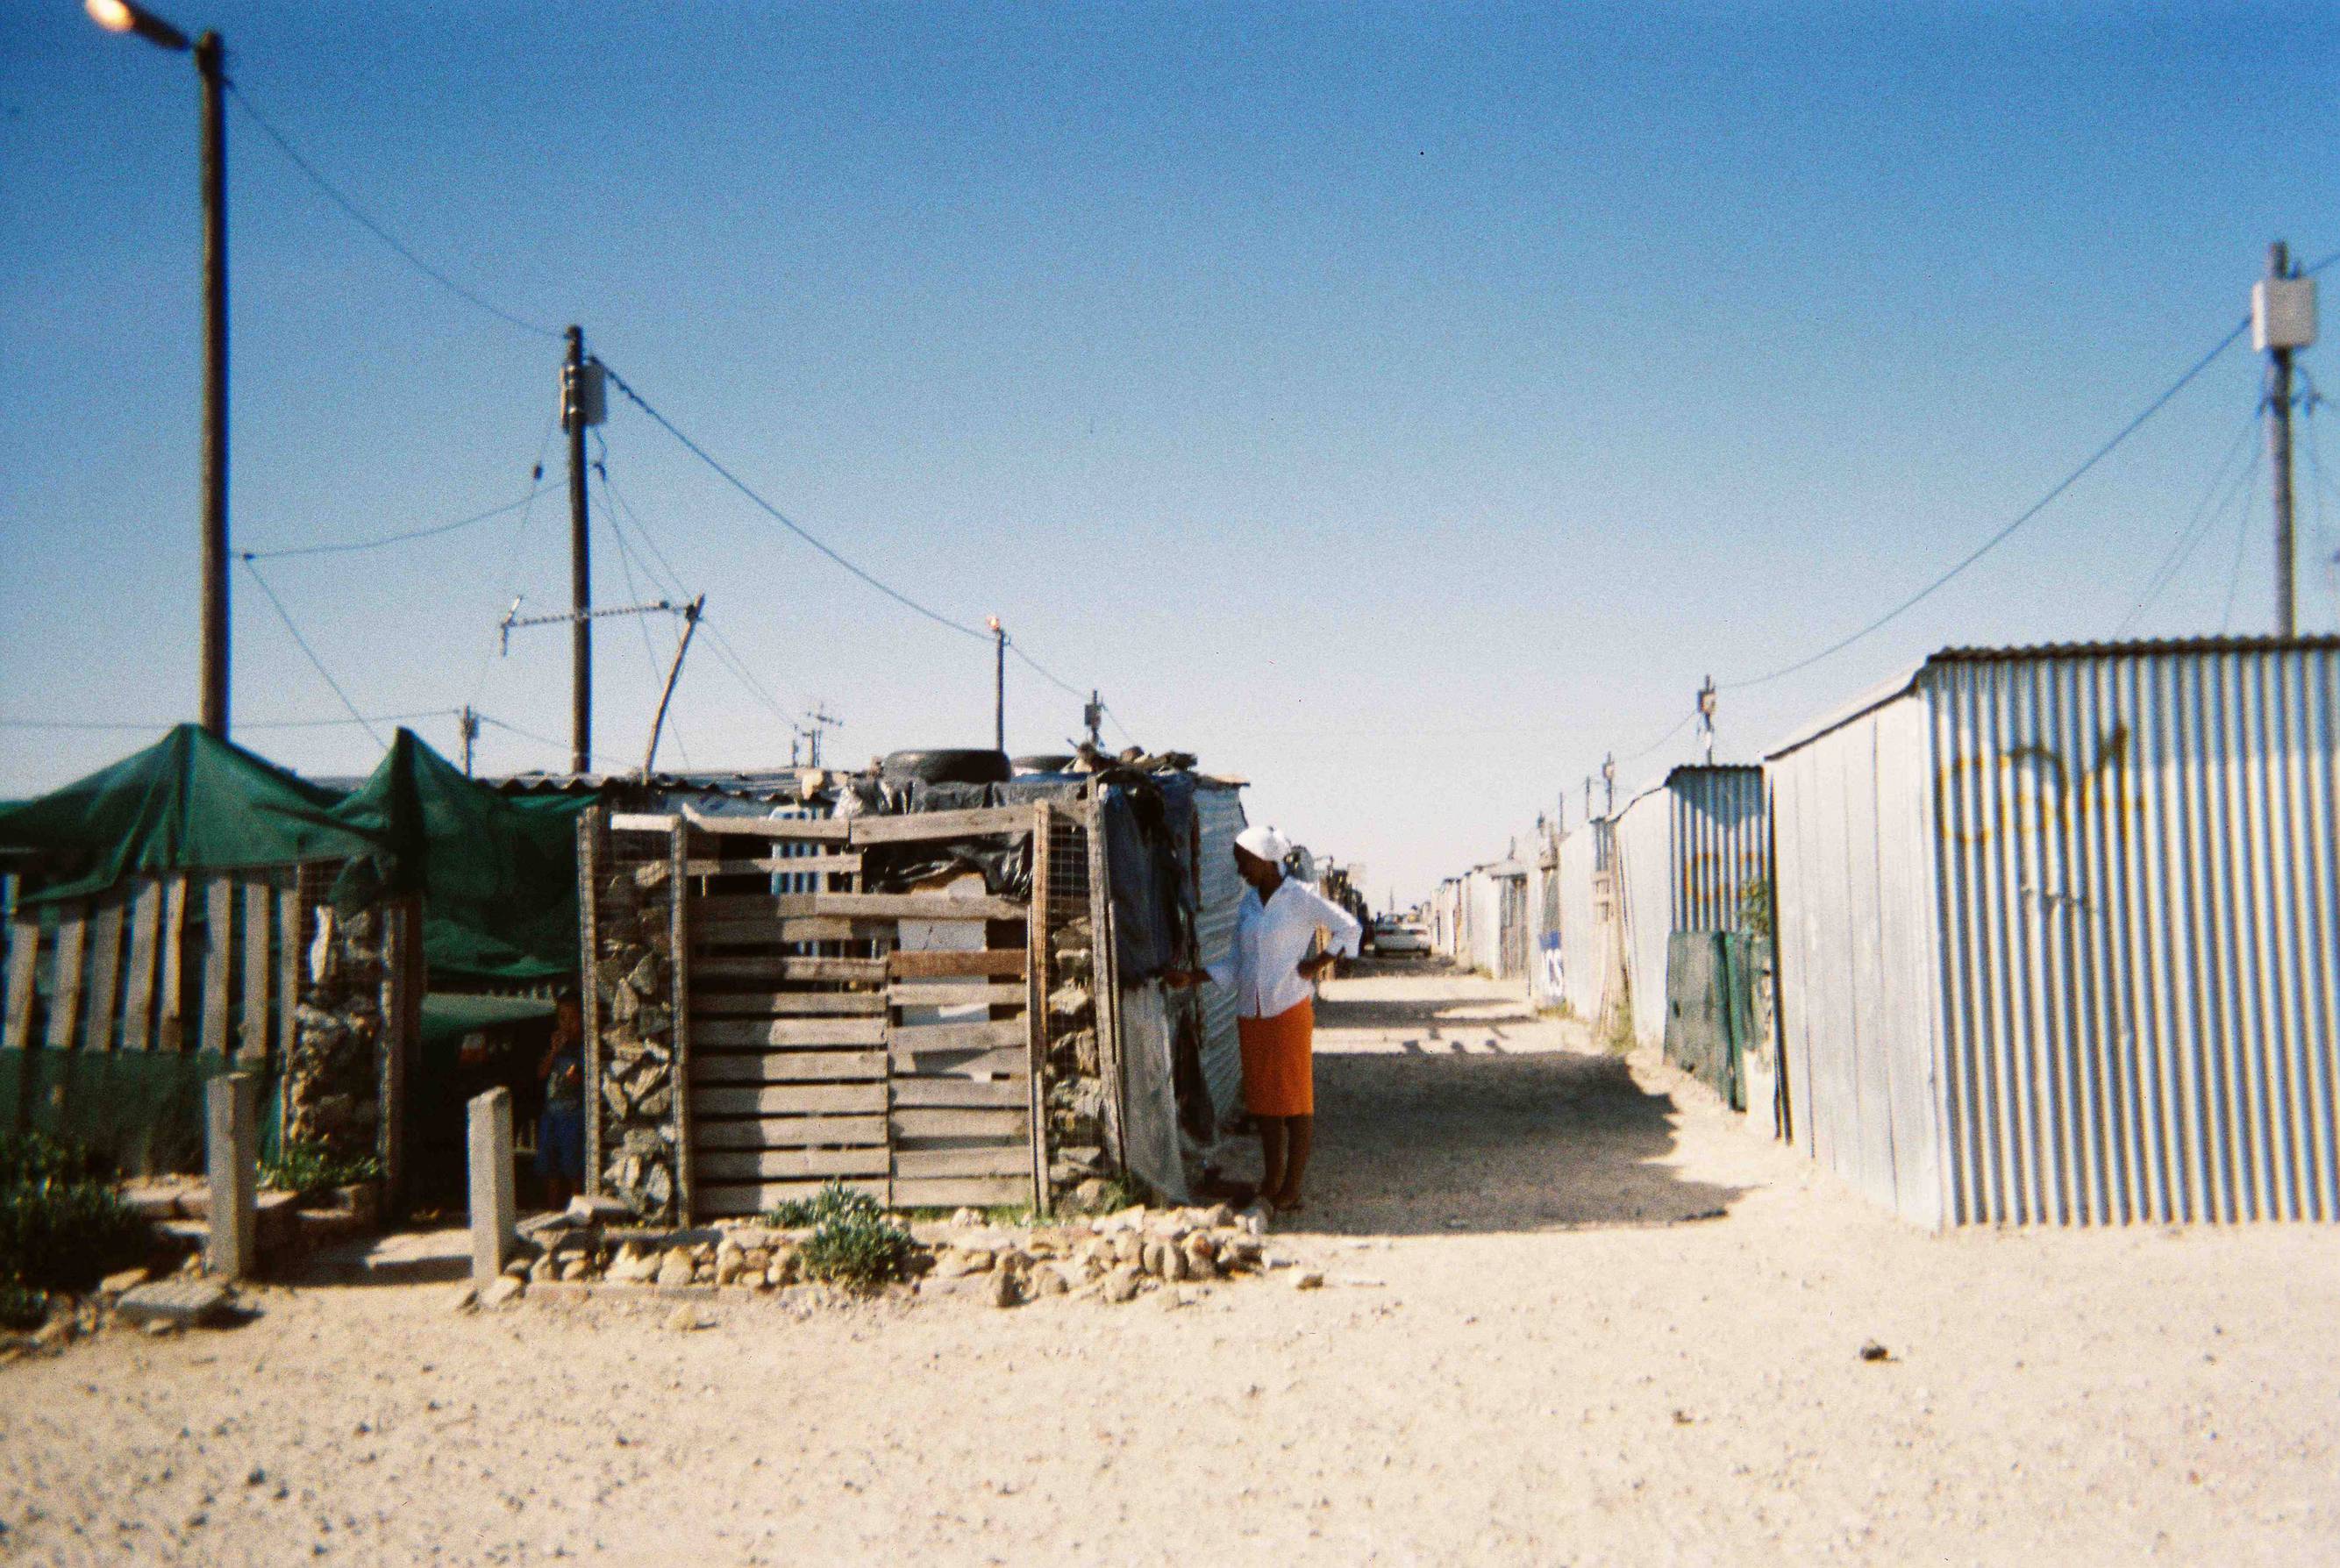 Blikkiesdorp charity photography project in township Cape Town, South Africa